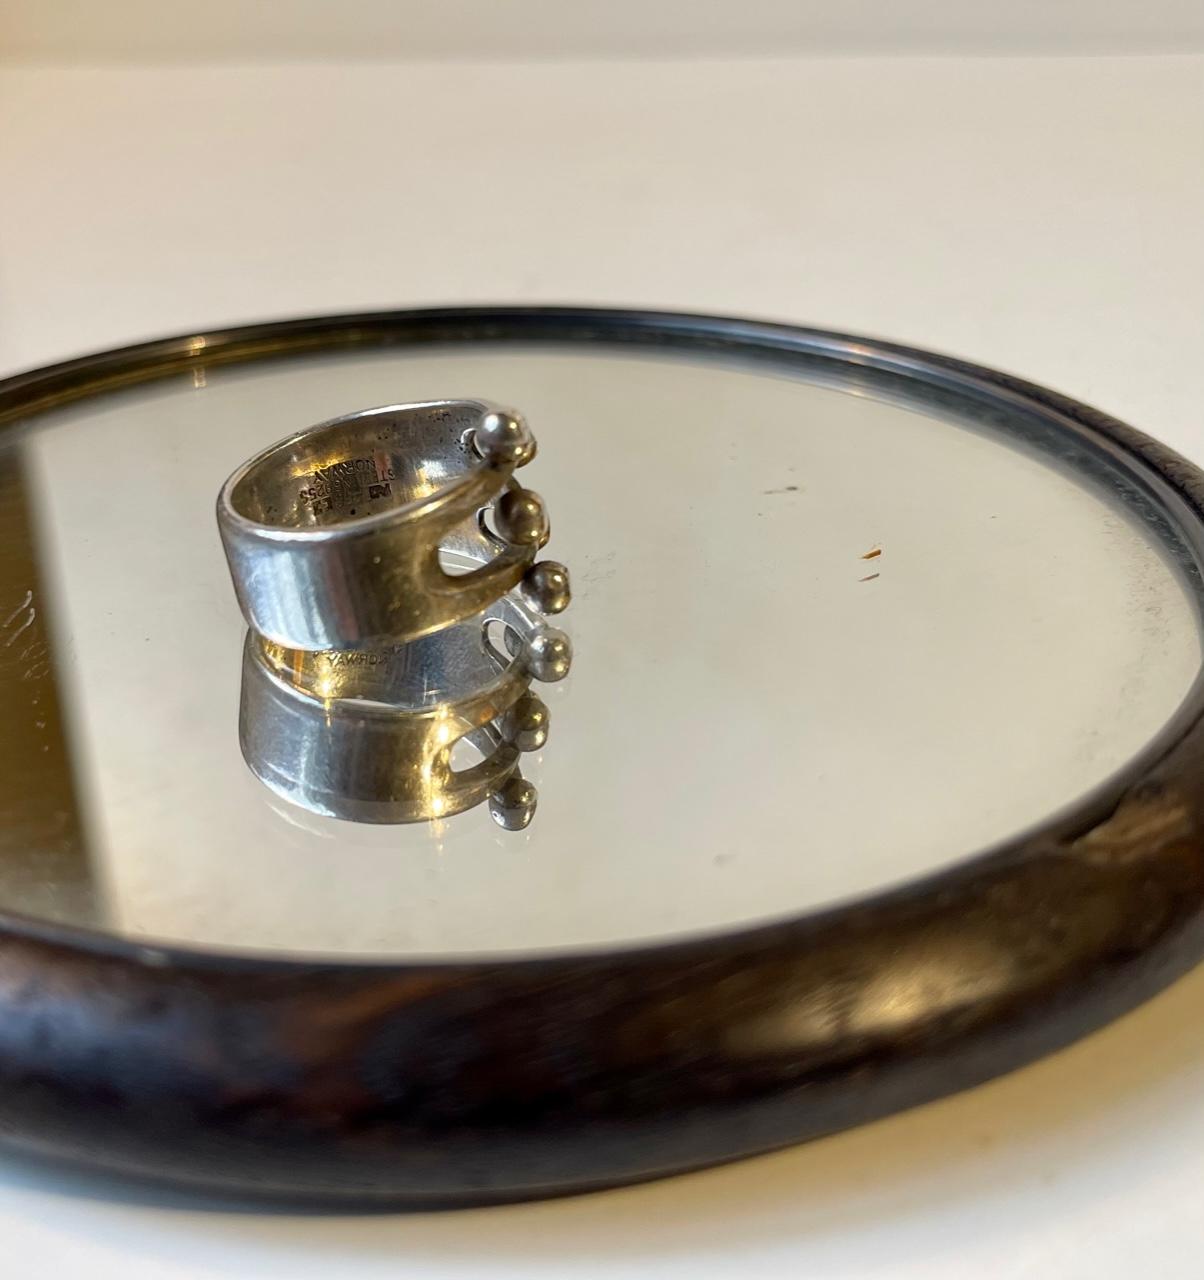 Intertwined sterling silver ring with pronounced beads. Designed by Anna-Greta Eker for Plus in Norway. circa 1960-1970. Marked ”AGE [+ mark] sterling 925 S Norway”. Measurements: 16/56 on ring measurer. It can be adjusted 2-3 mm either way.

     